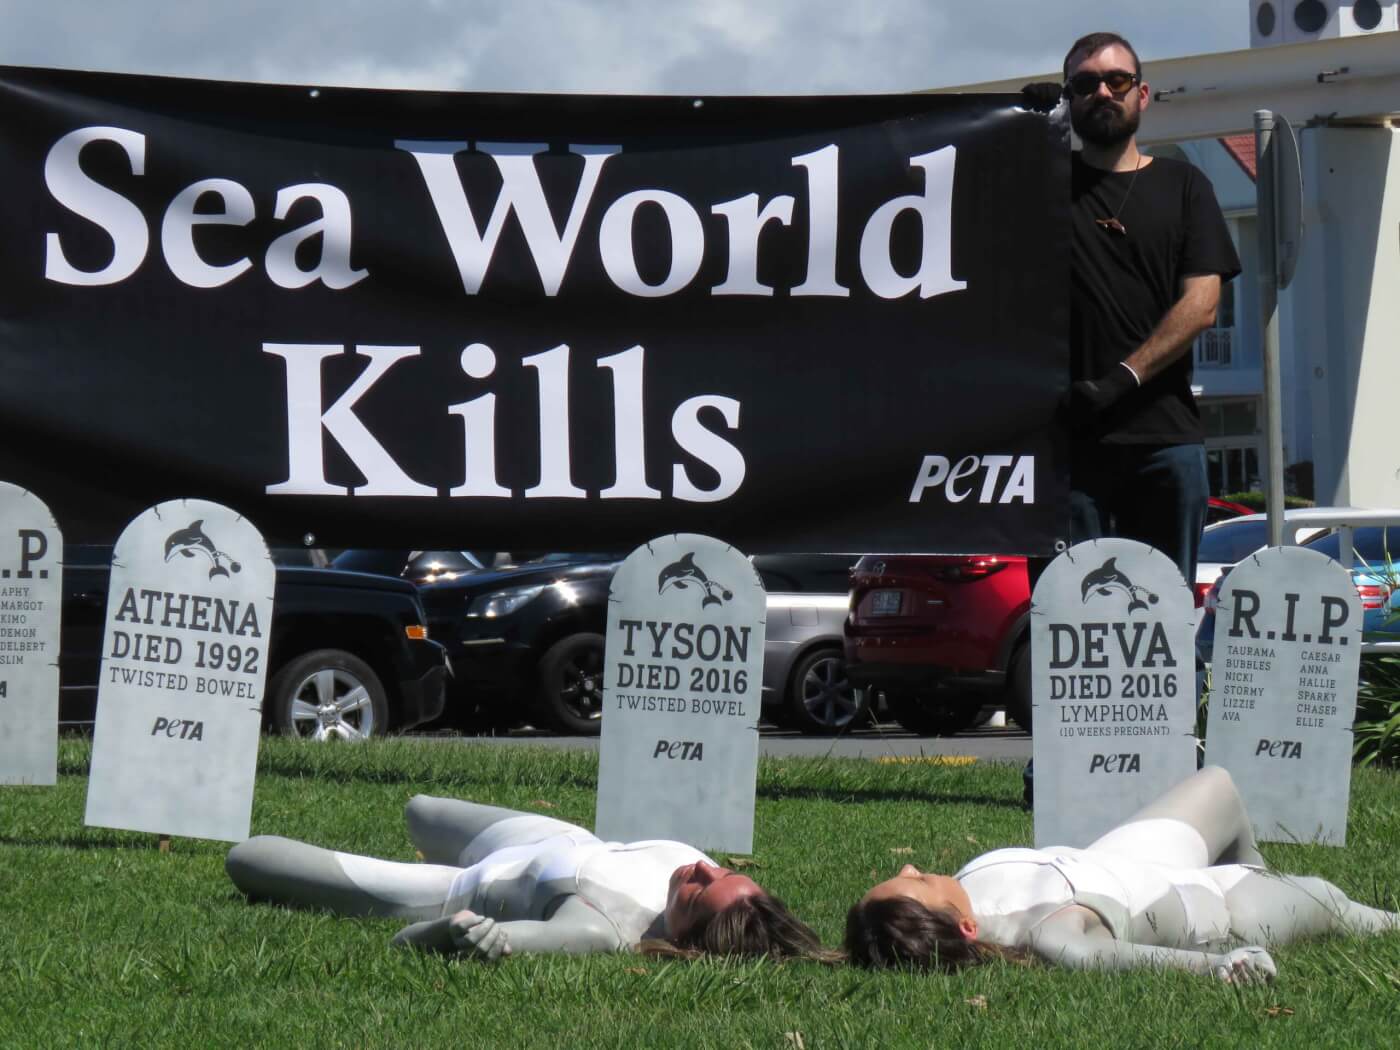 two activists painted grey and white lie under a banner which reads "Se World Kills"